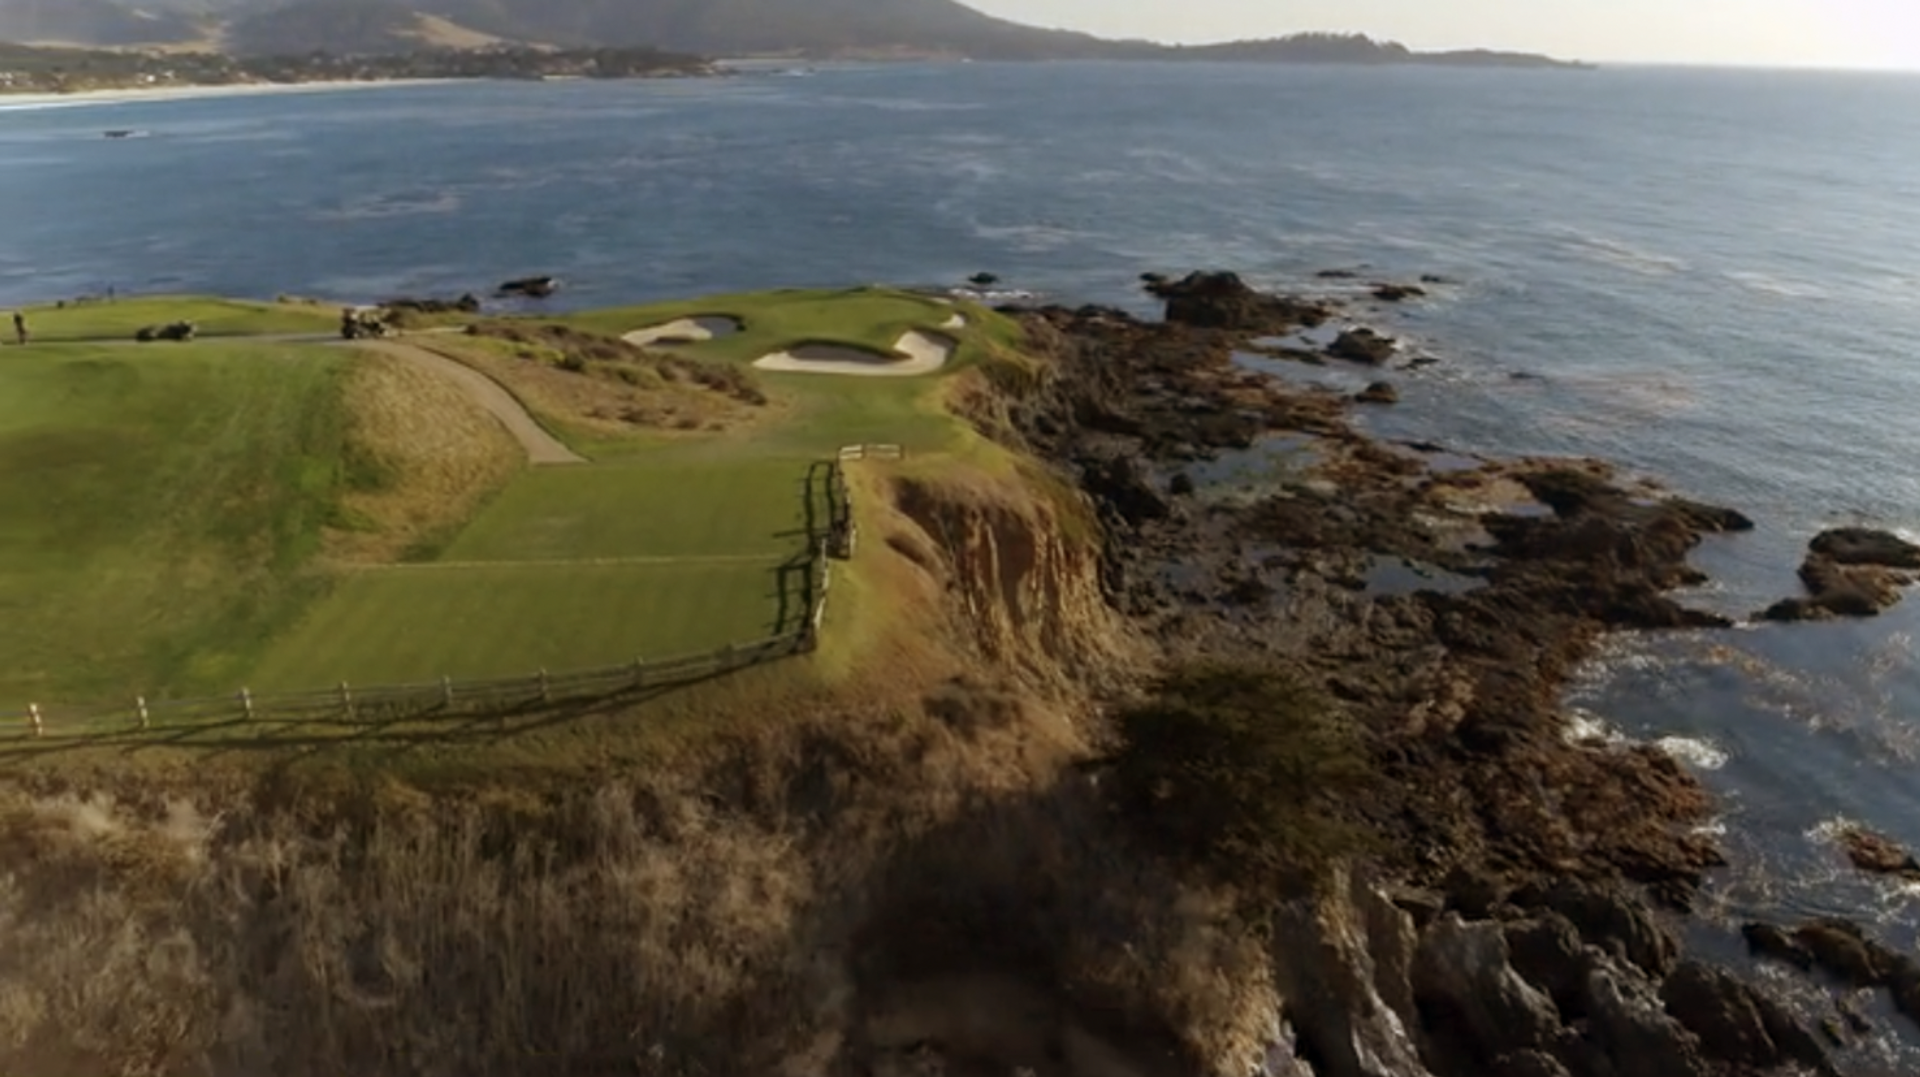 2023 AT&T Pebble Beach Pro-Am: How to watch, TV schedule, tee times